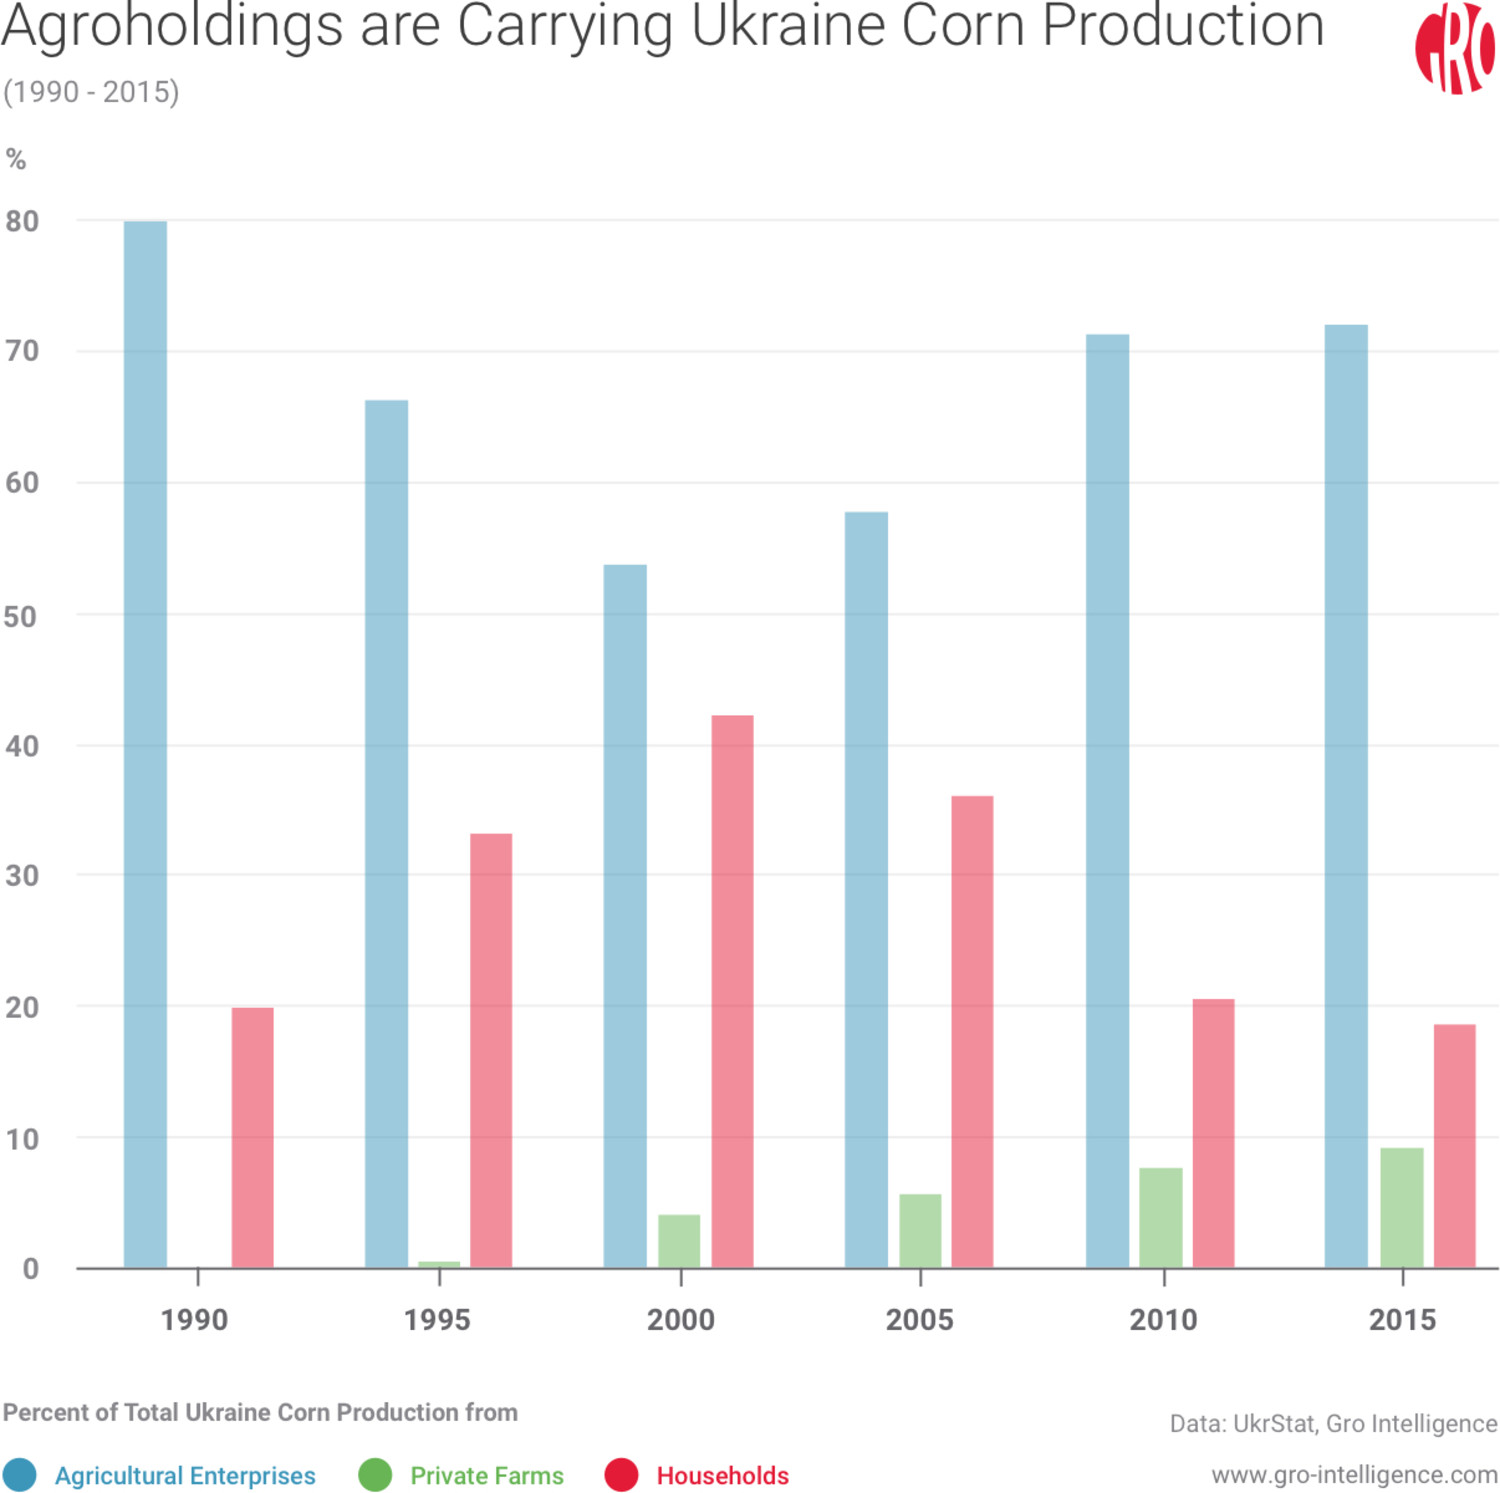 Agroholdings are Carrying Ukraine Corn Production